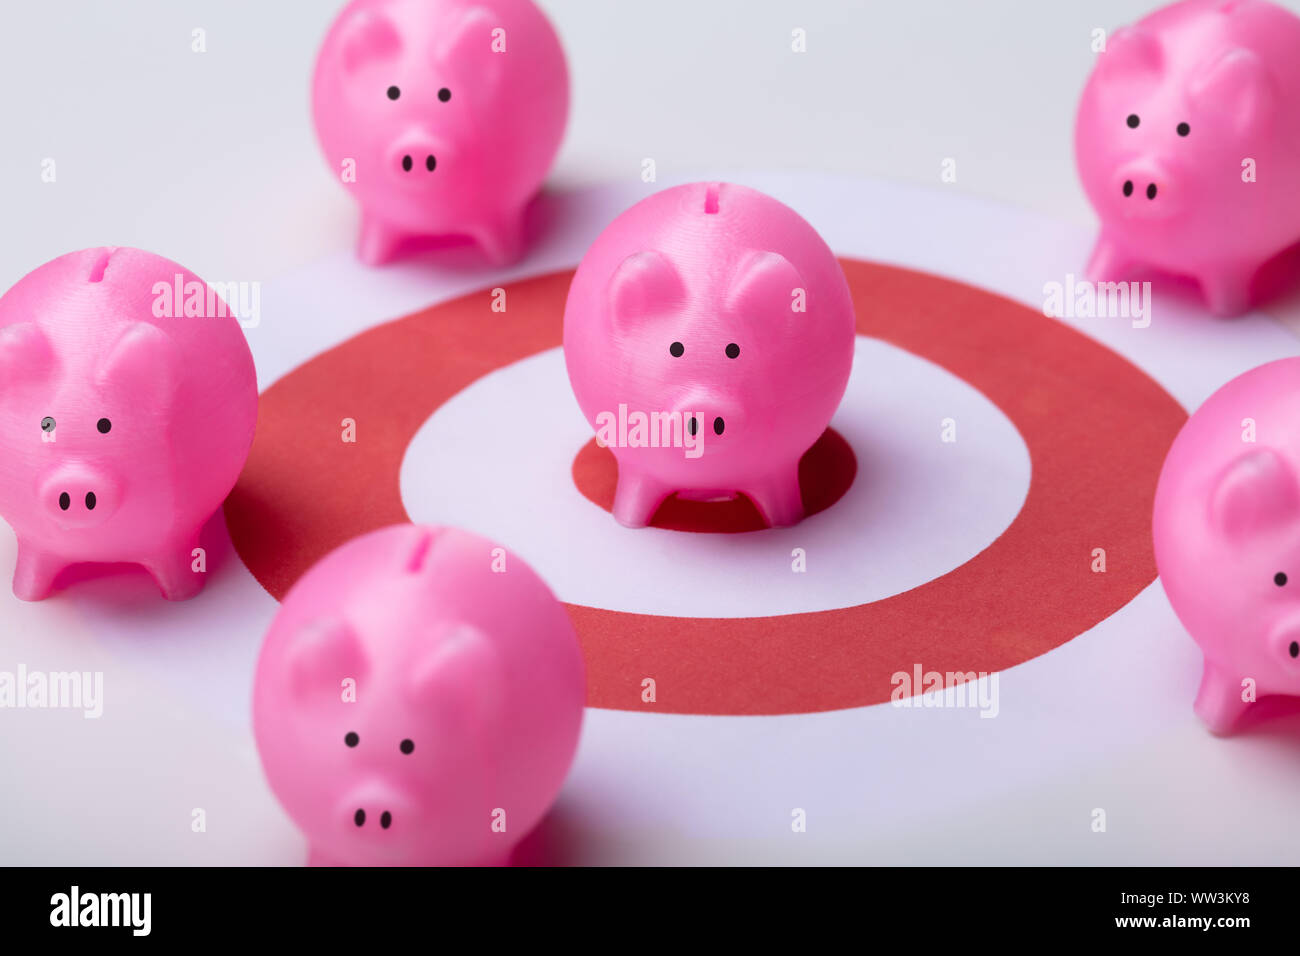 Pink Piggy Banks On Darts Target Surrounded With Other Piggy Banks Over White Desk Stock Photo